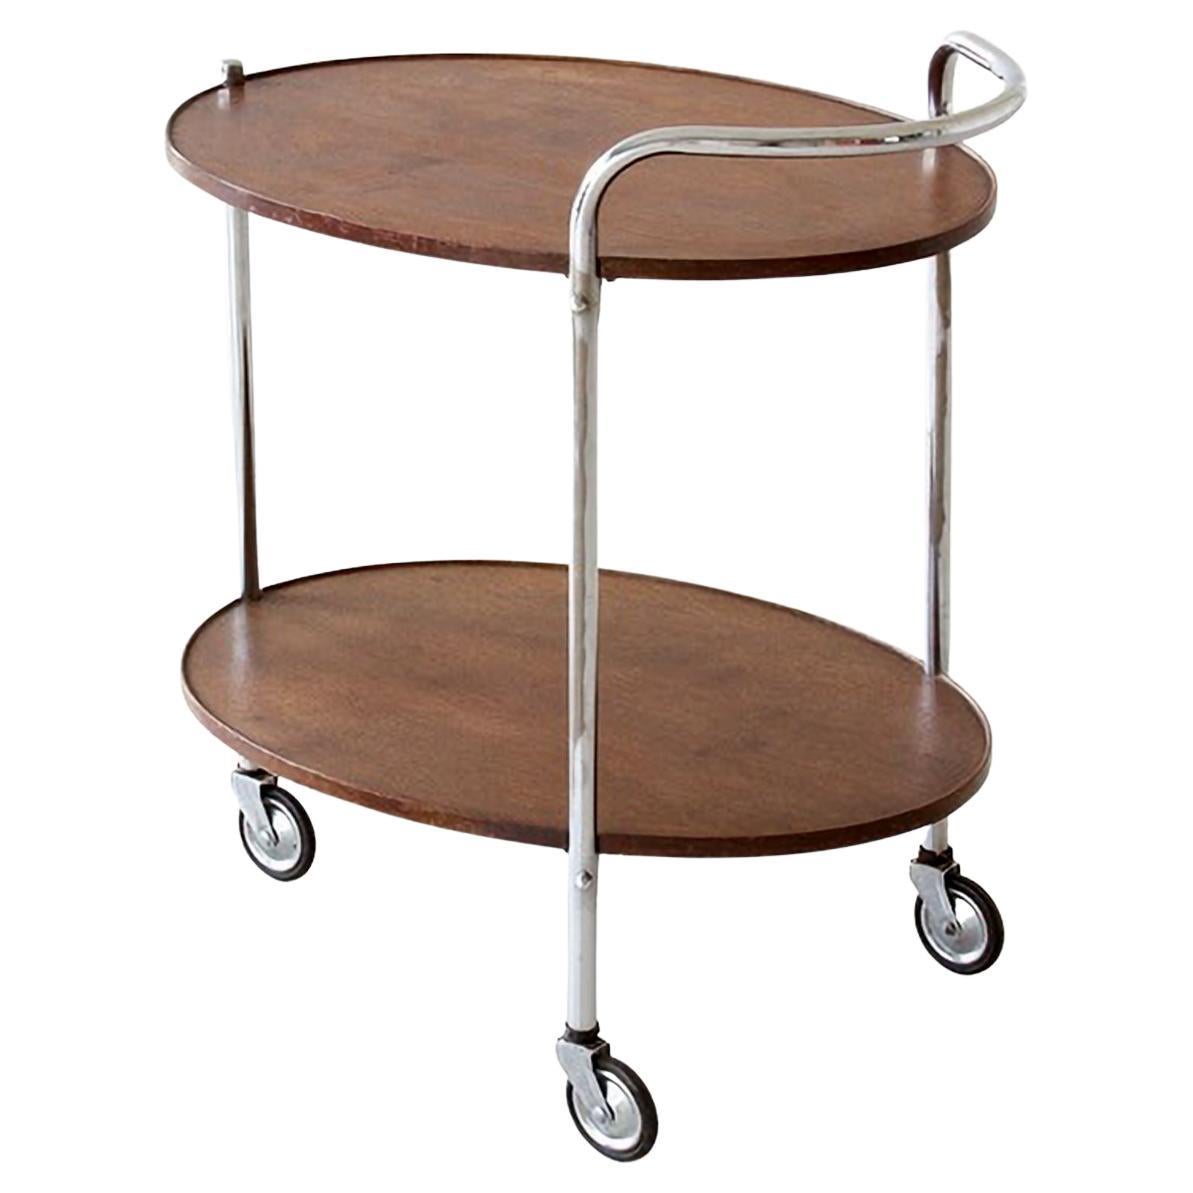 Modernist Serving Trolley with Two Oval Wooden Shelves Chromed Metal, circa 1930 For Sale